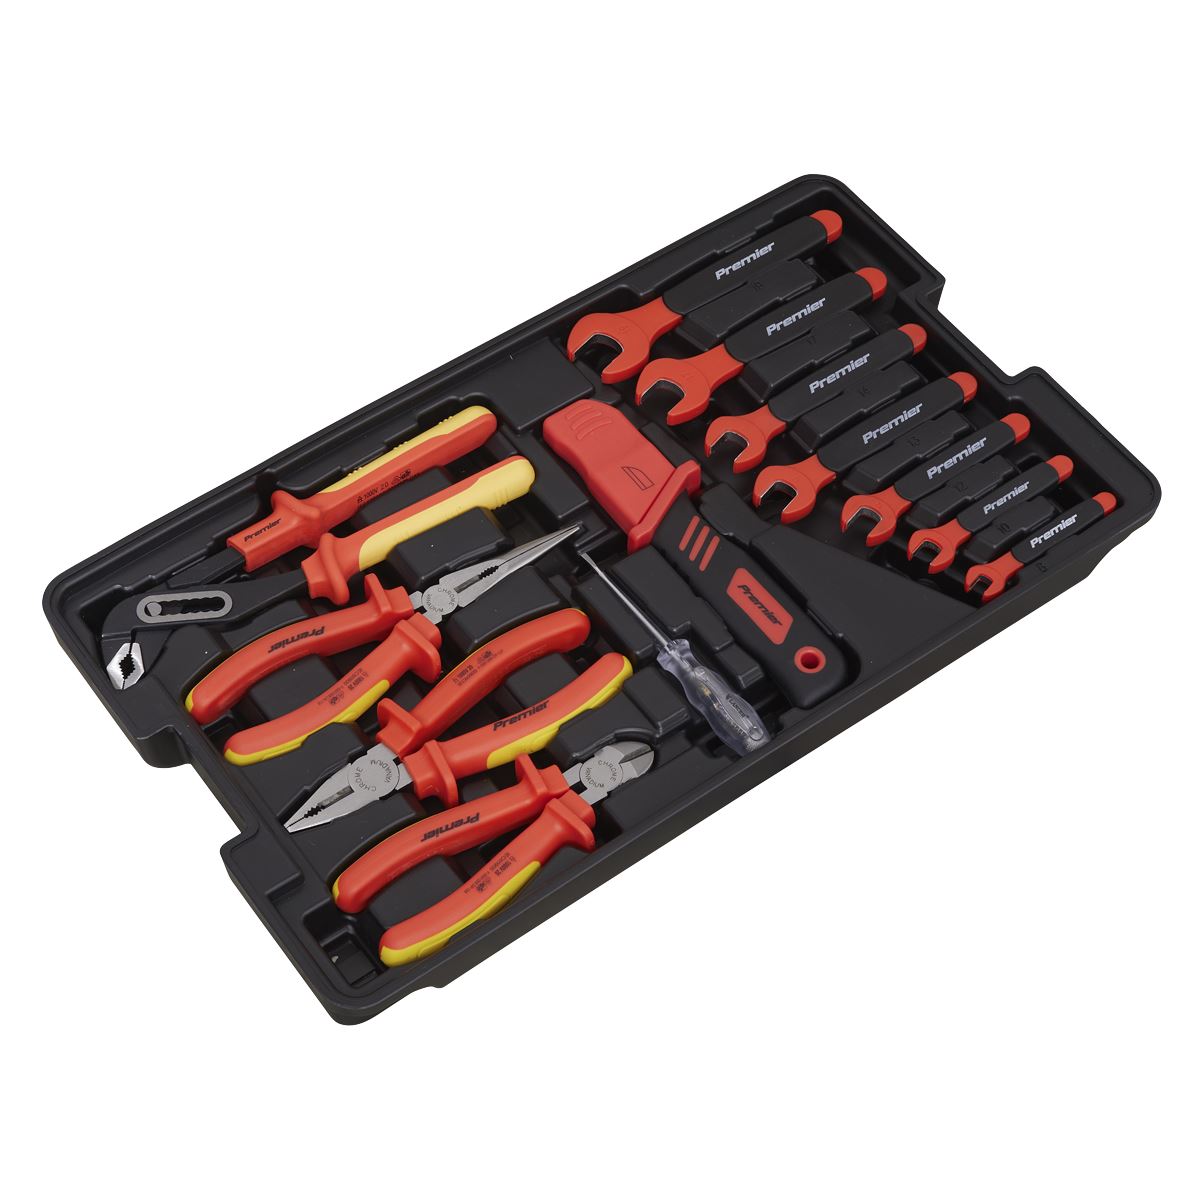 Sealey Premier 1000V Insulated Tool Kit 3/8"Sq Drive 50pc